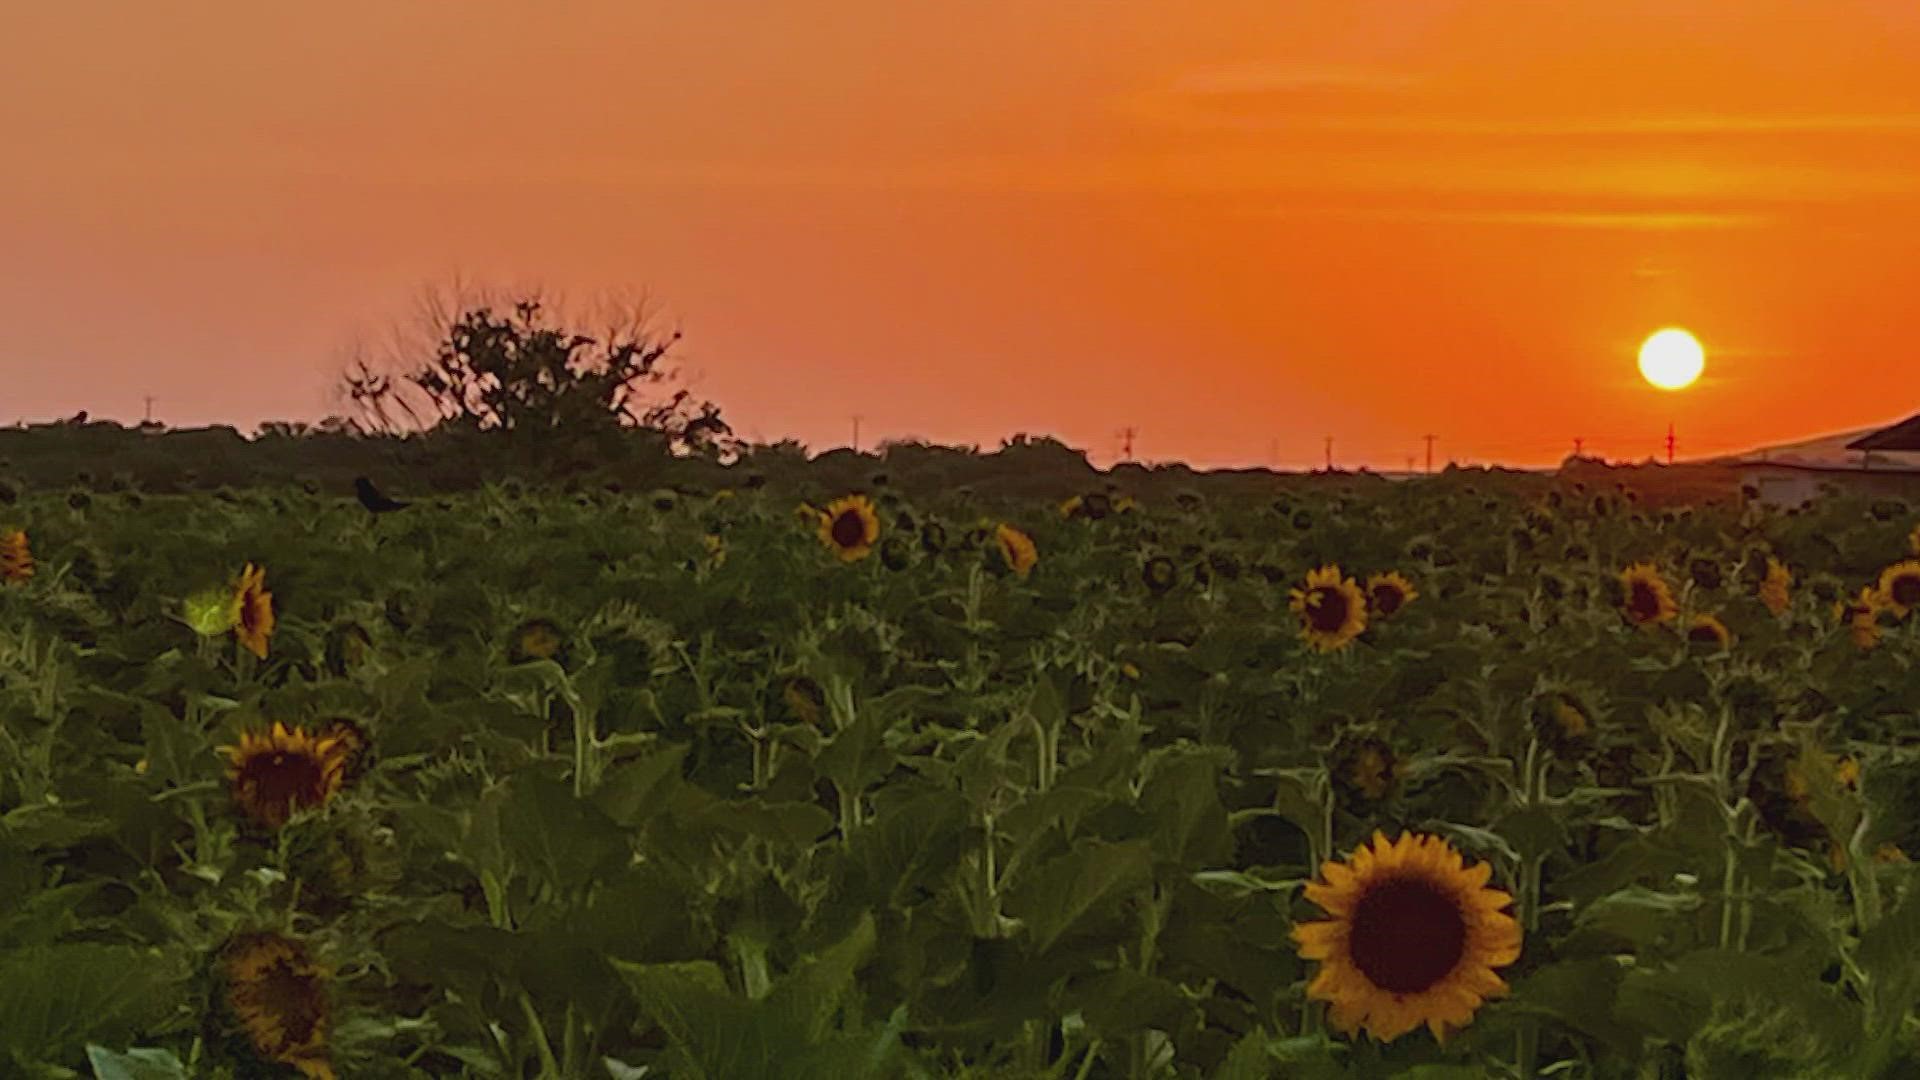 Sunflower enthusiasts, it's time to shine! The Sunflower Field will be open in San Antonio this weekend.